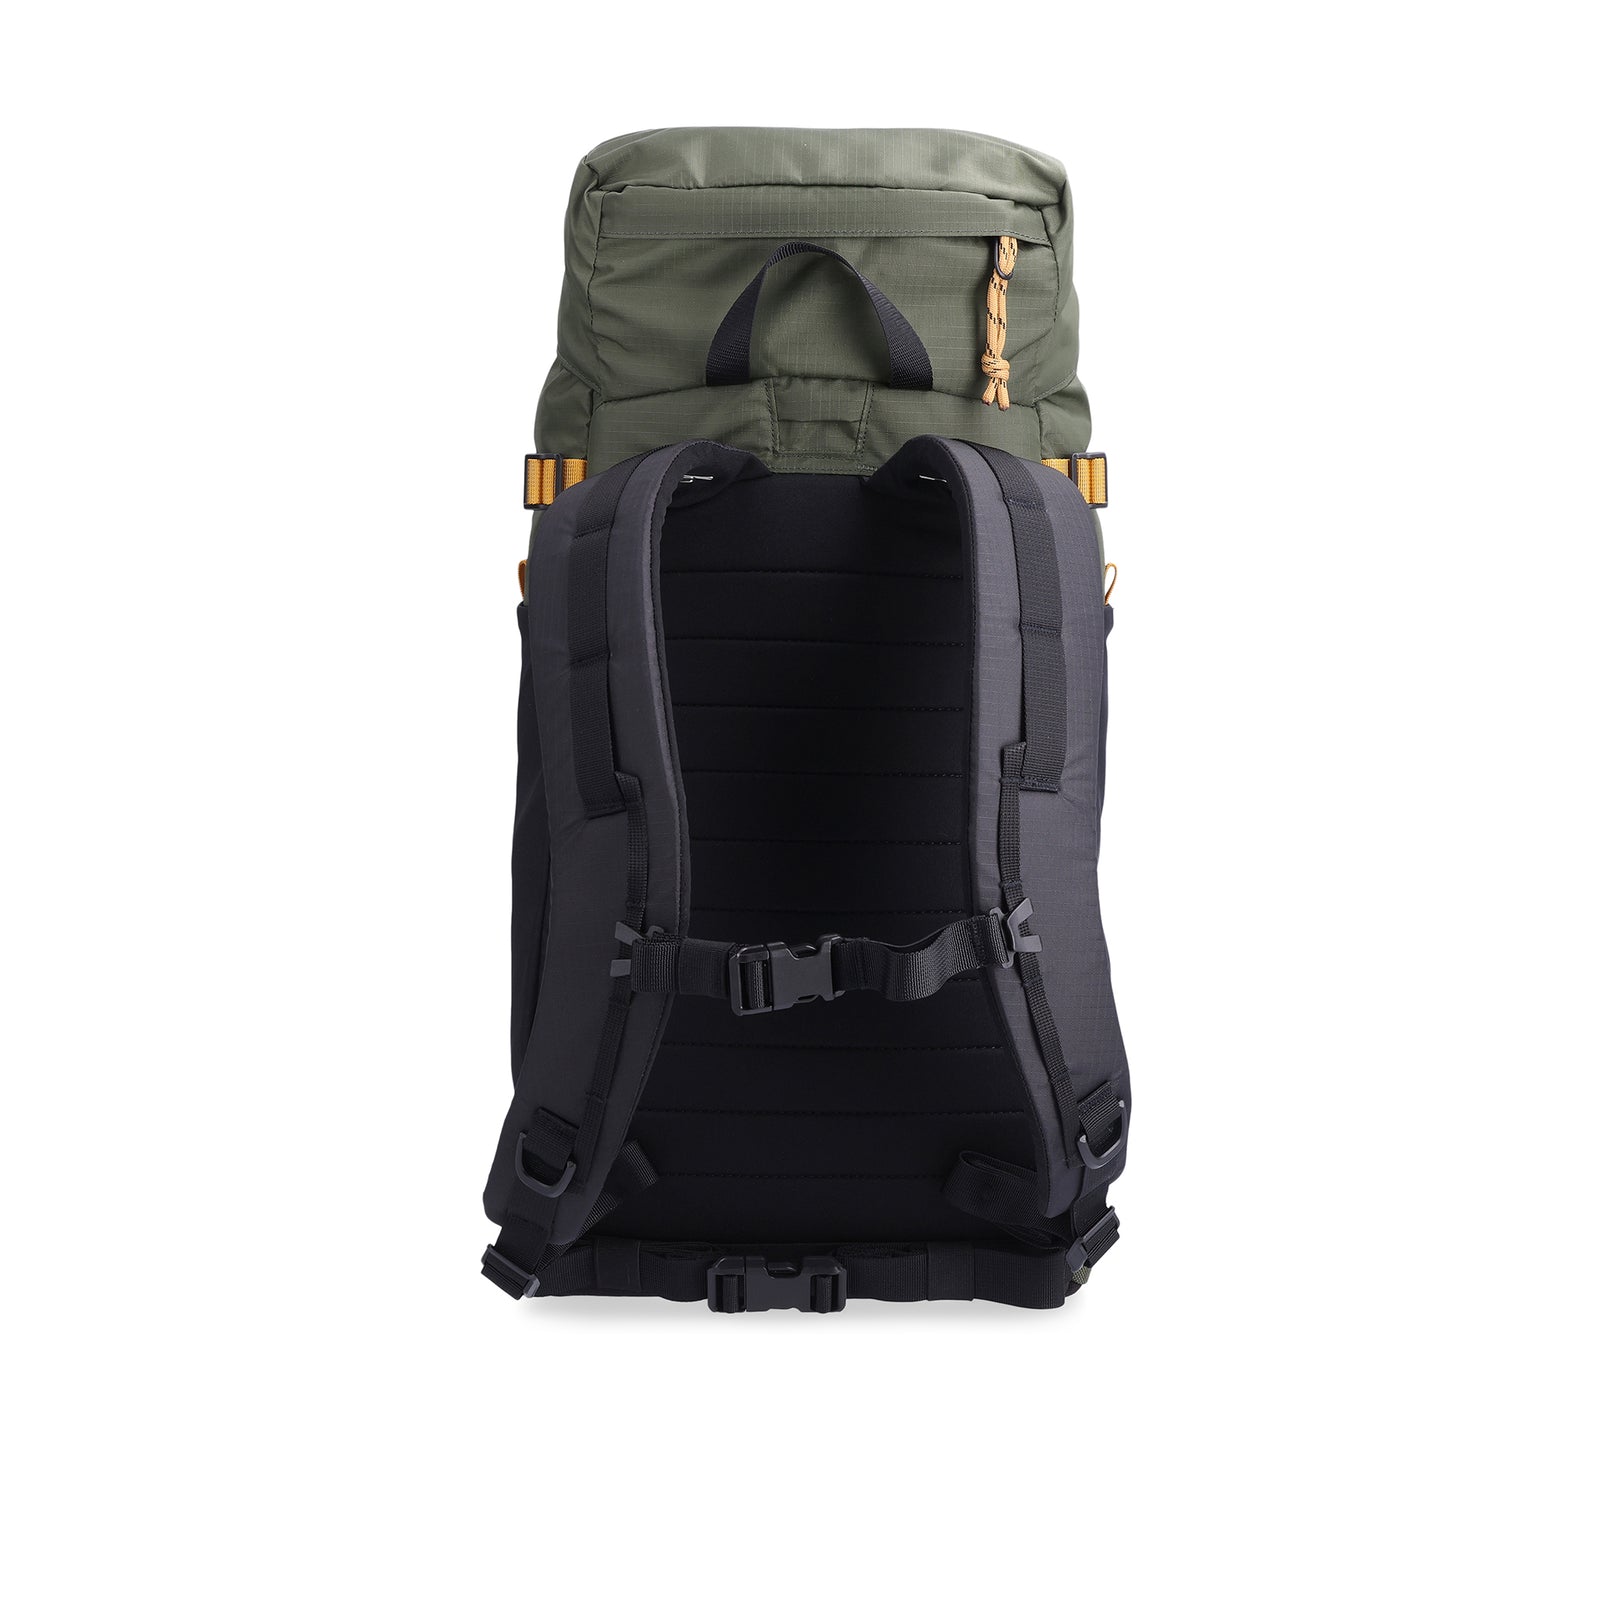 Shot of padded backpack straps and sternum strap on back of Topo Designs Mountain Pack 16L hiking backpack with internal laptop sleeve in lightweight recycled nylon in "Bone White / Olive".